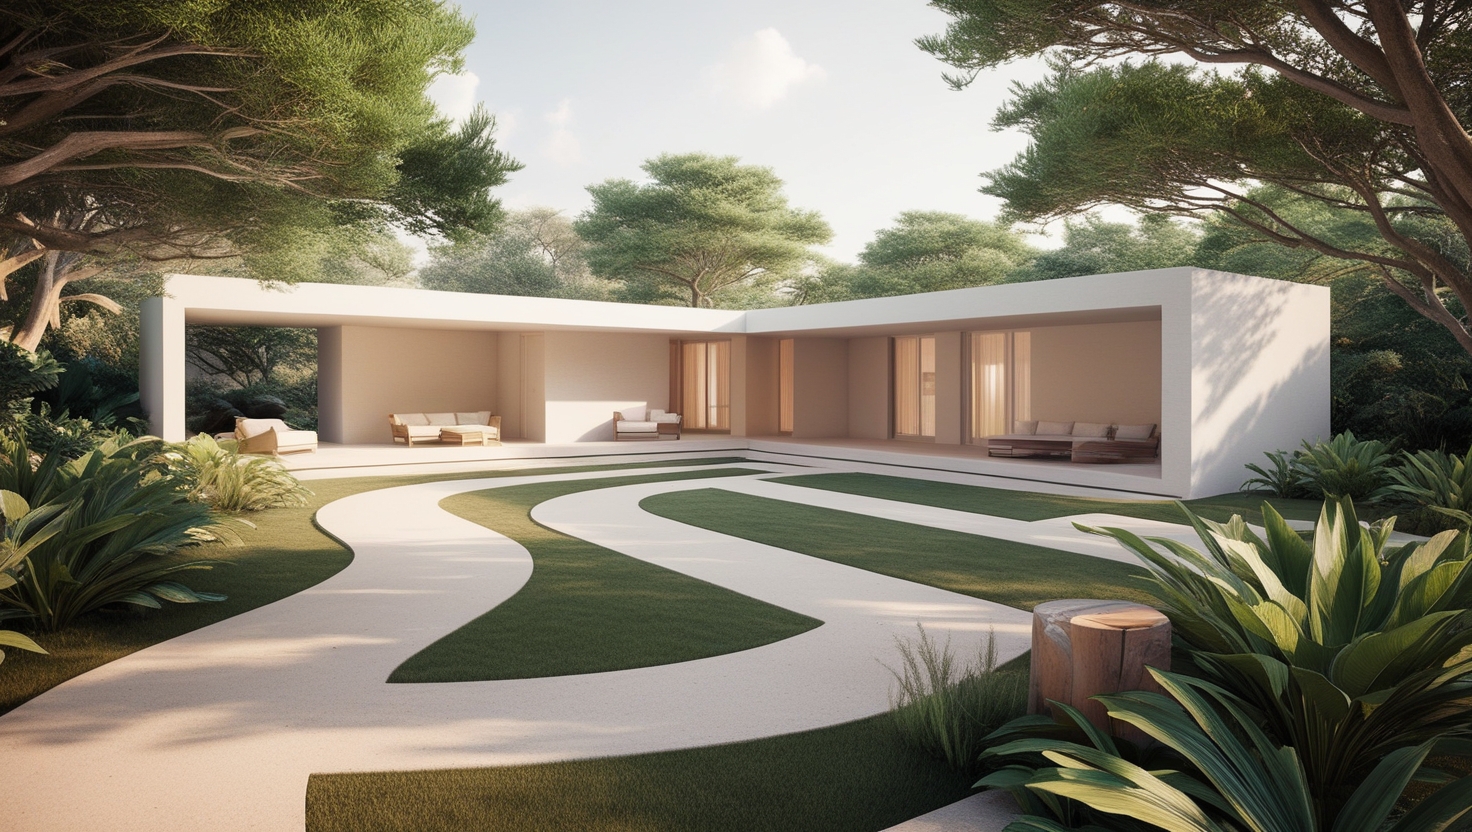 Minimalist house with patios and walkways concept part 4